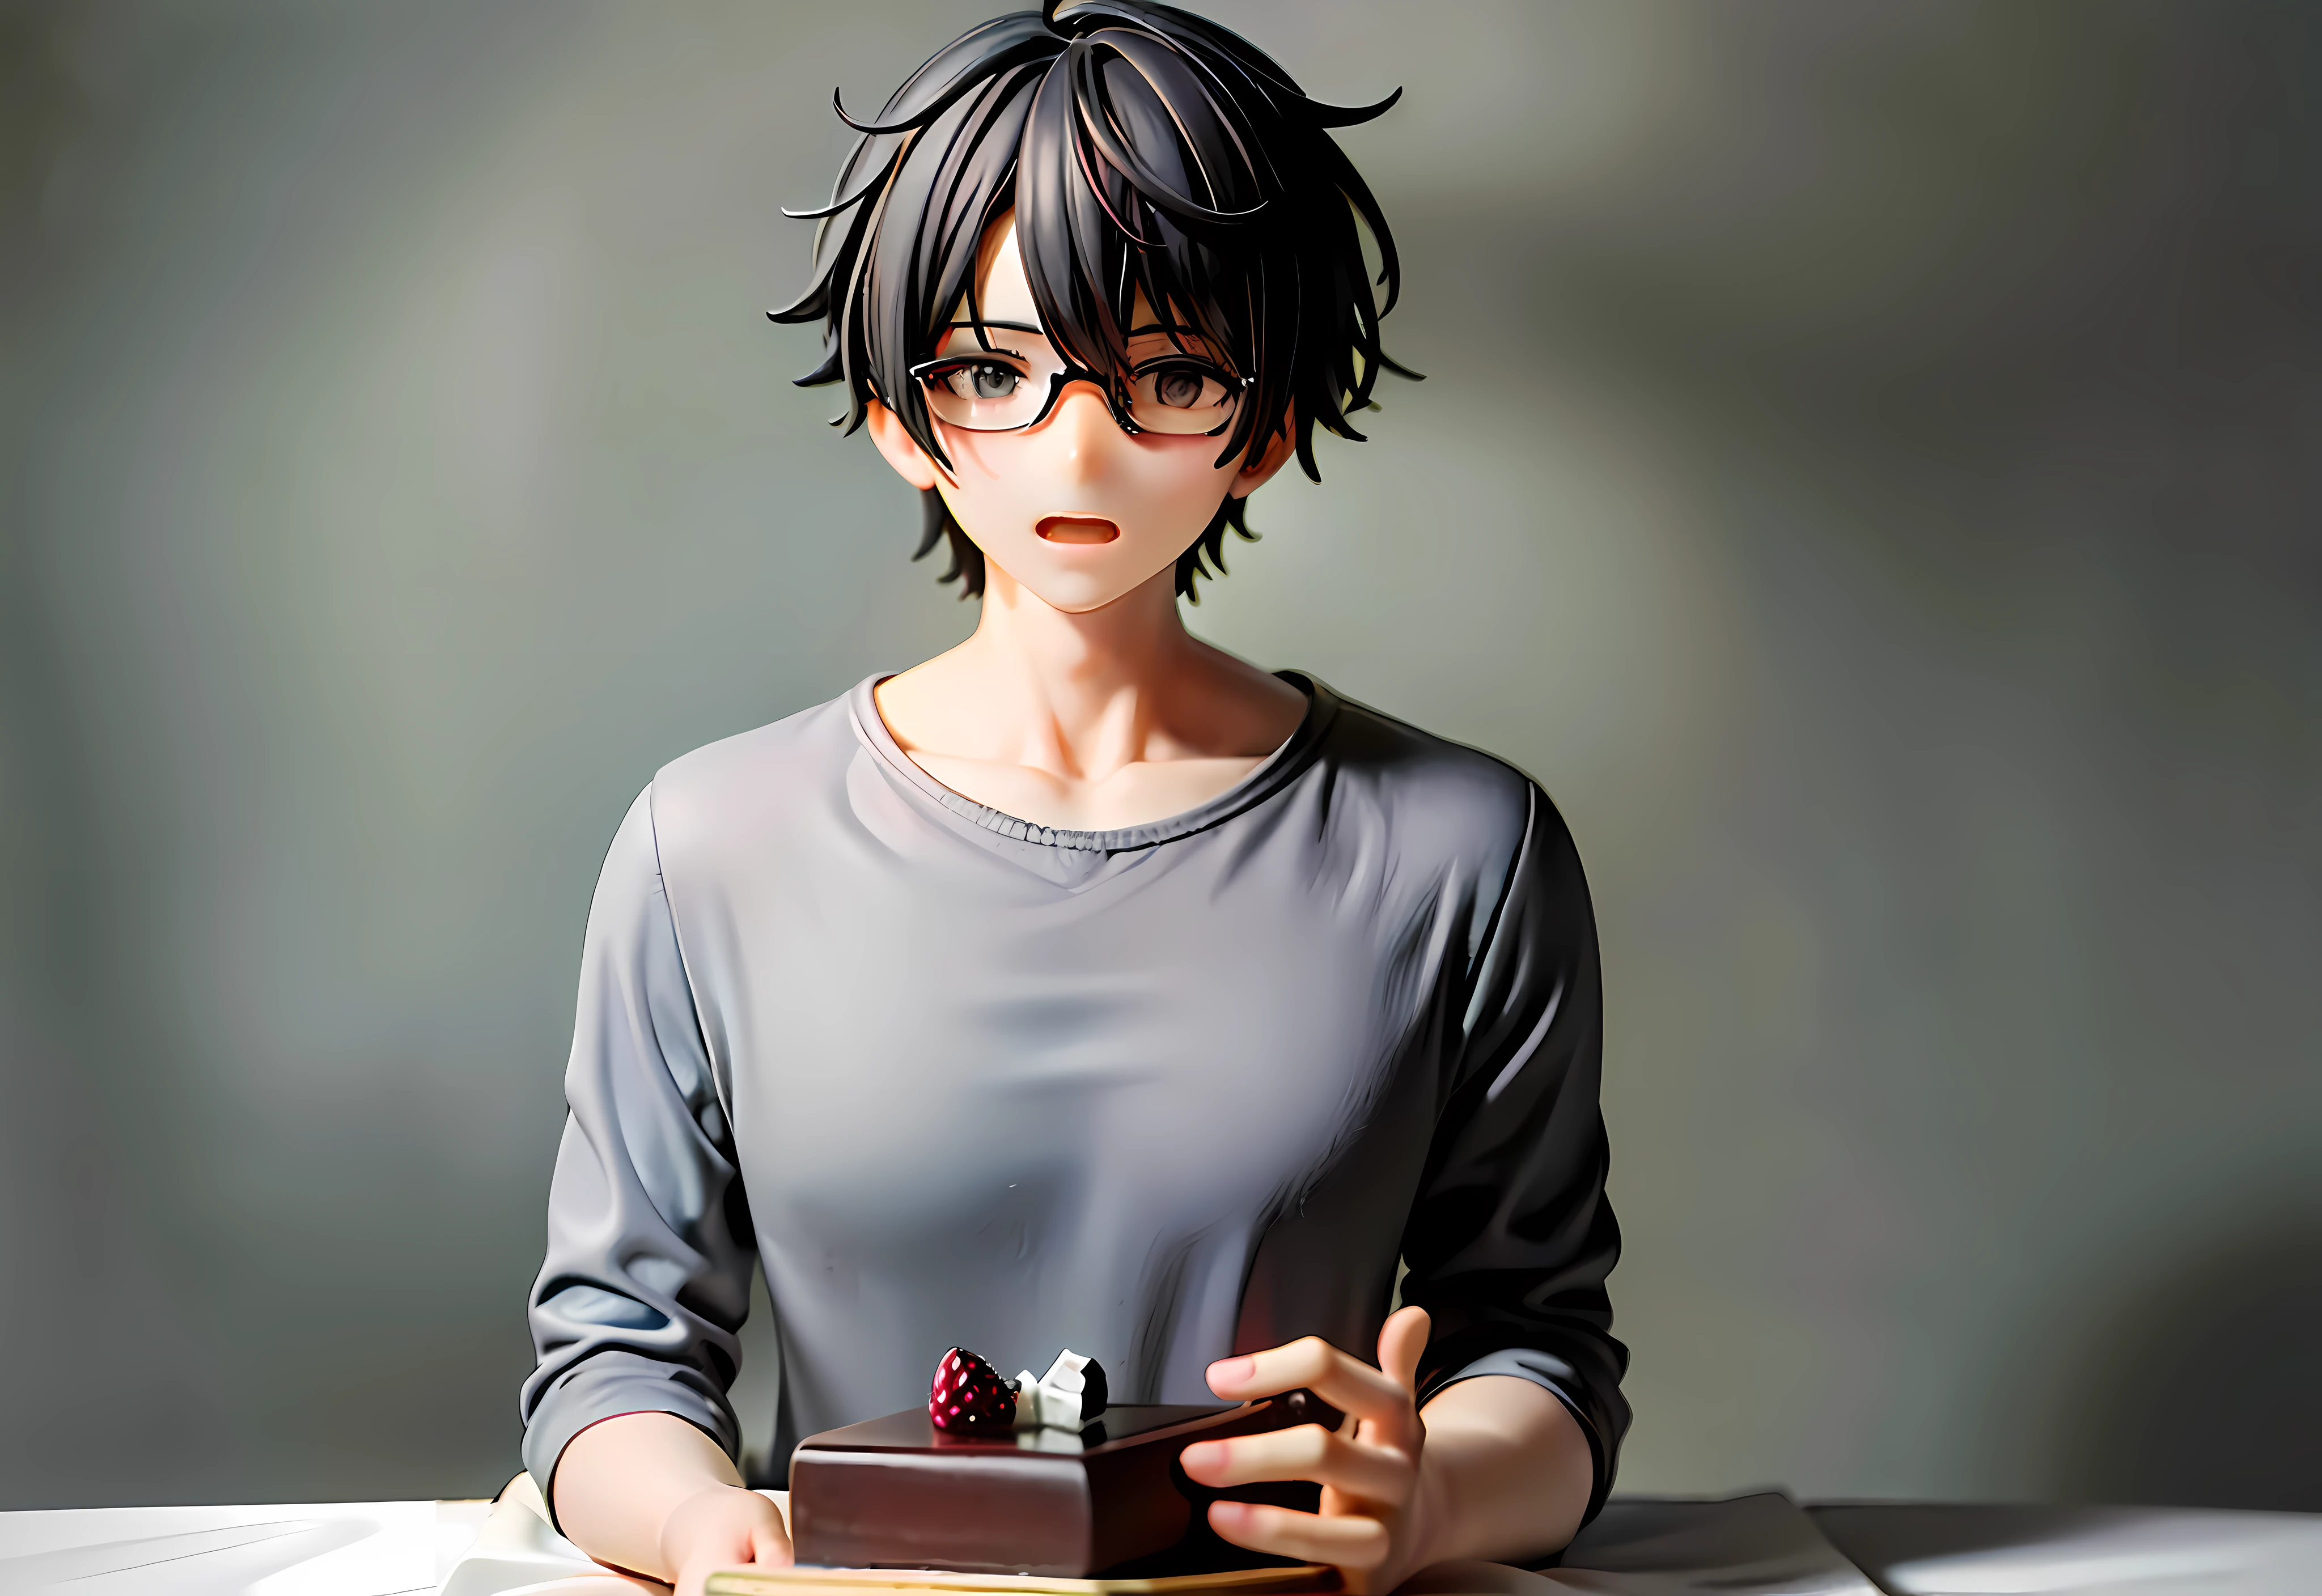 (cute guy:1.2),black messy hair,glasses,(1 guy:1.2),birthday,cake,(embarrassment:1.2),face,scared,eyes, big surprise! masterpiece wallpaper 8K, full rendering, lineart, the guy is standing alone in a black puffer, pleasantly surprised